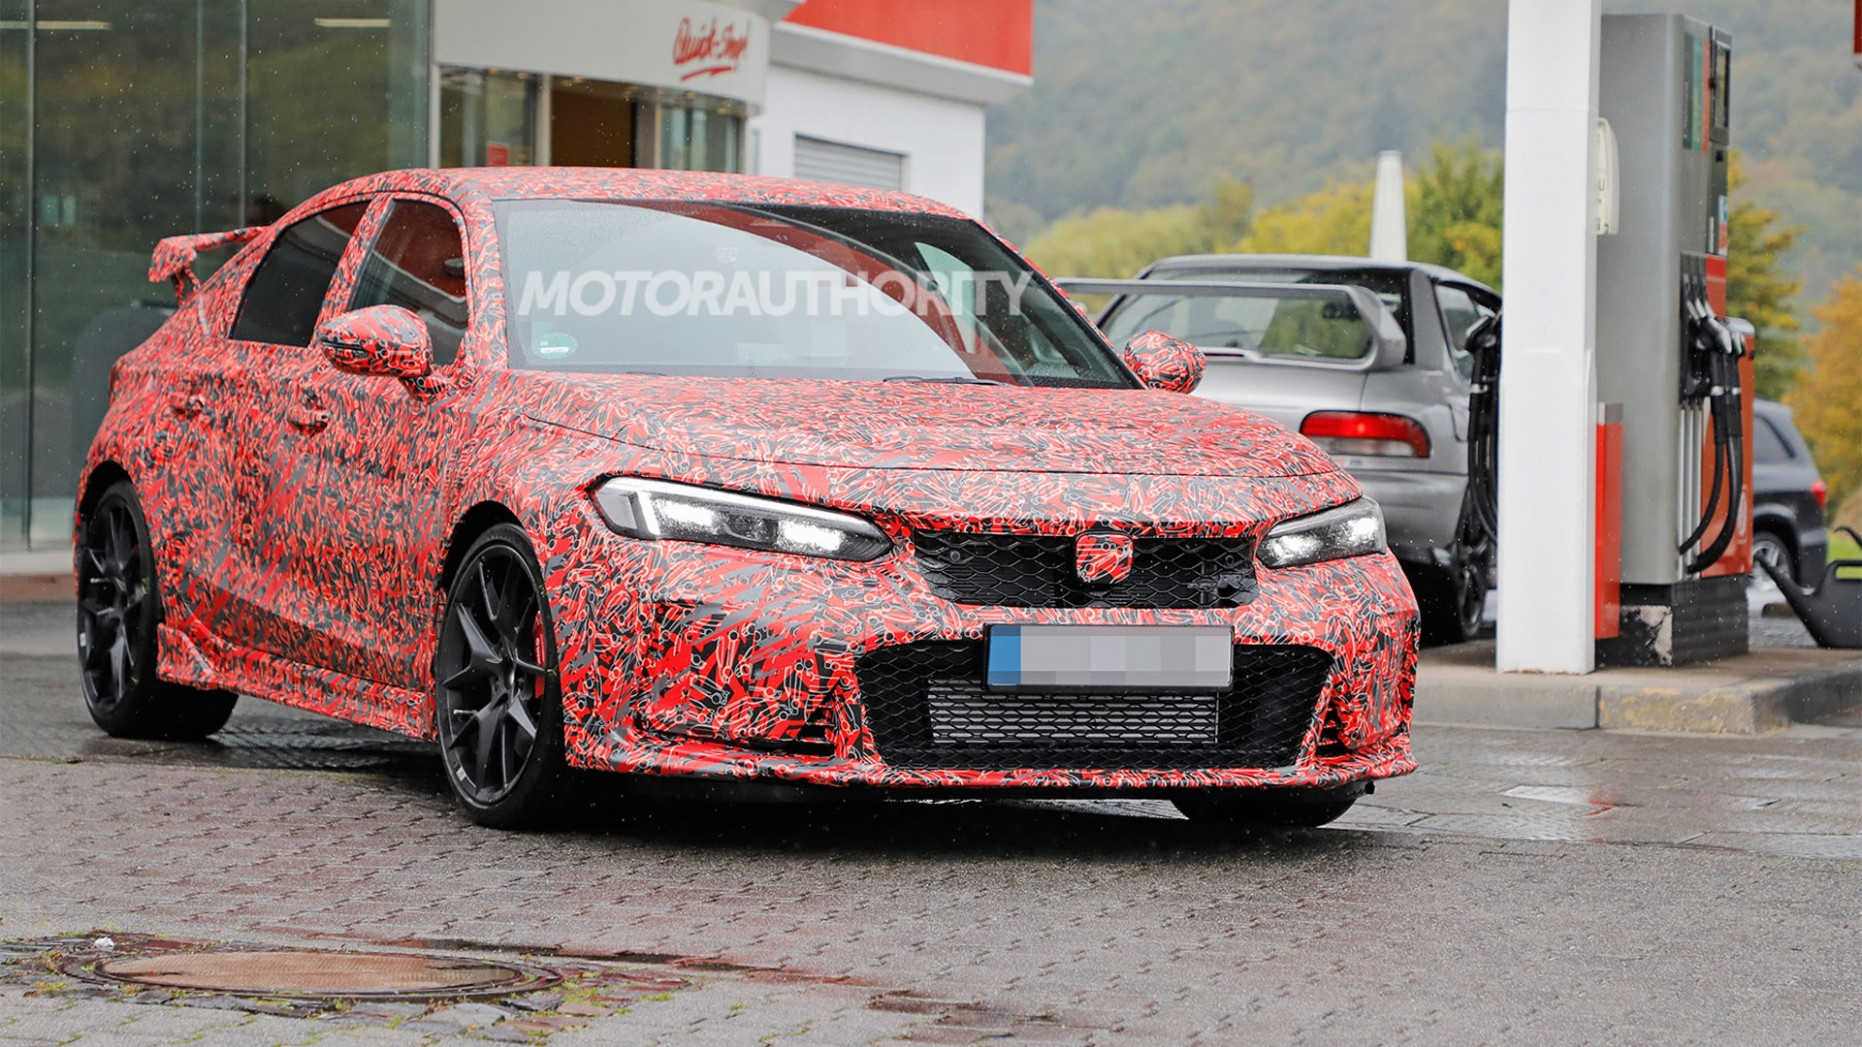 3 Honda Civic Type R Spy Shots And Video: Redesigned Hot Hatch 2023 Civic Type R